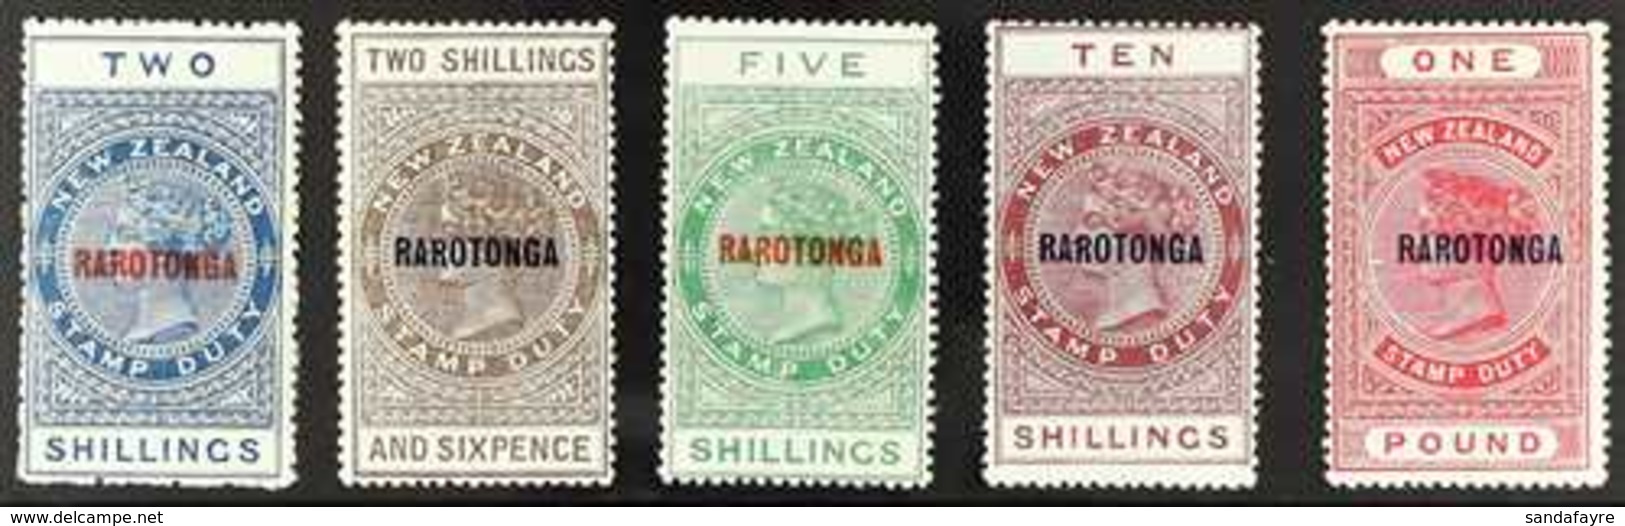 1921-23 Postal Fiscals Stamps With "RAROTONGA" Overprints Complete Set, SG 76/80, Fine Mint, Very Fresh. (5 Stamps) For  - Cook